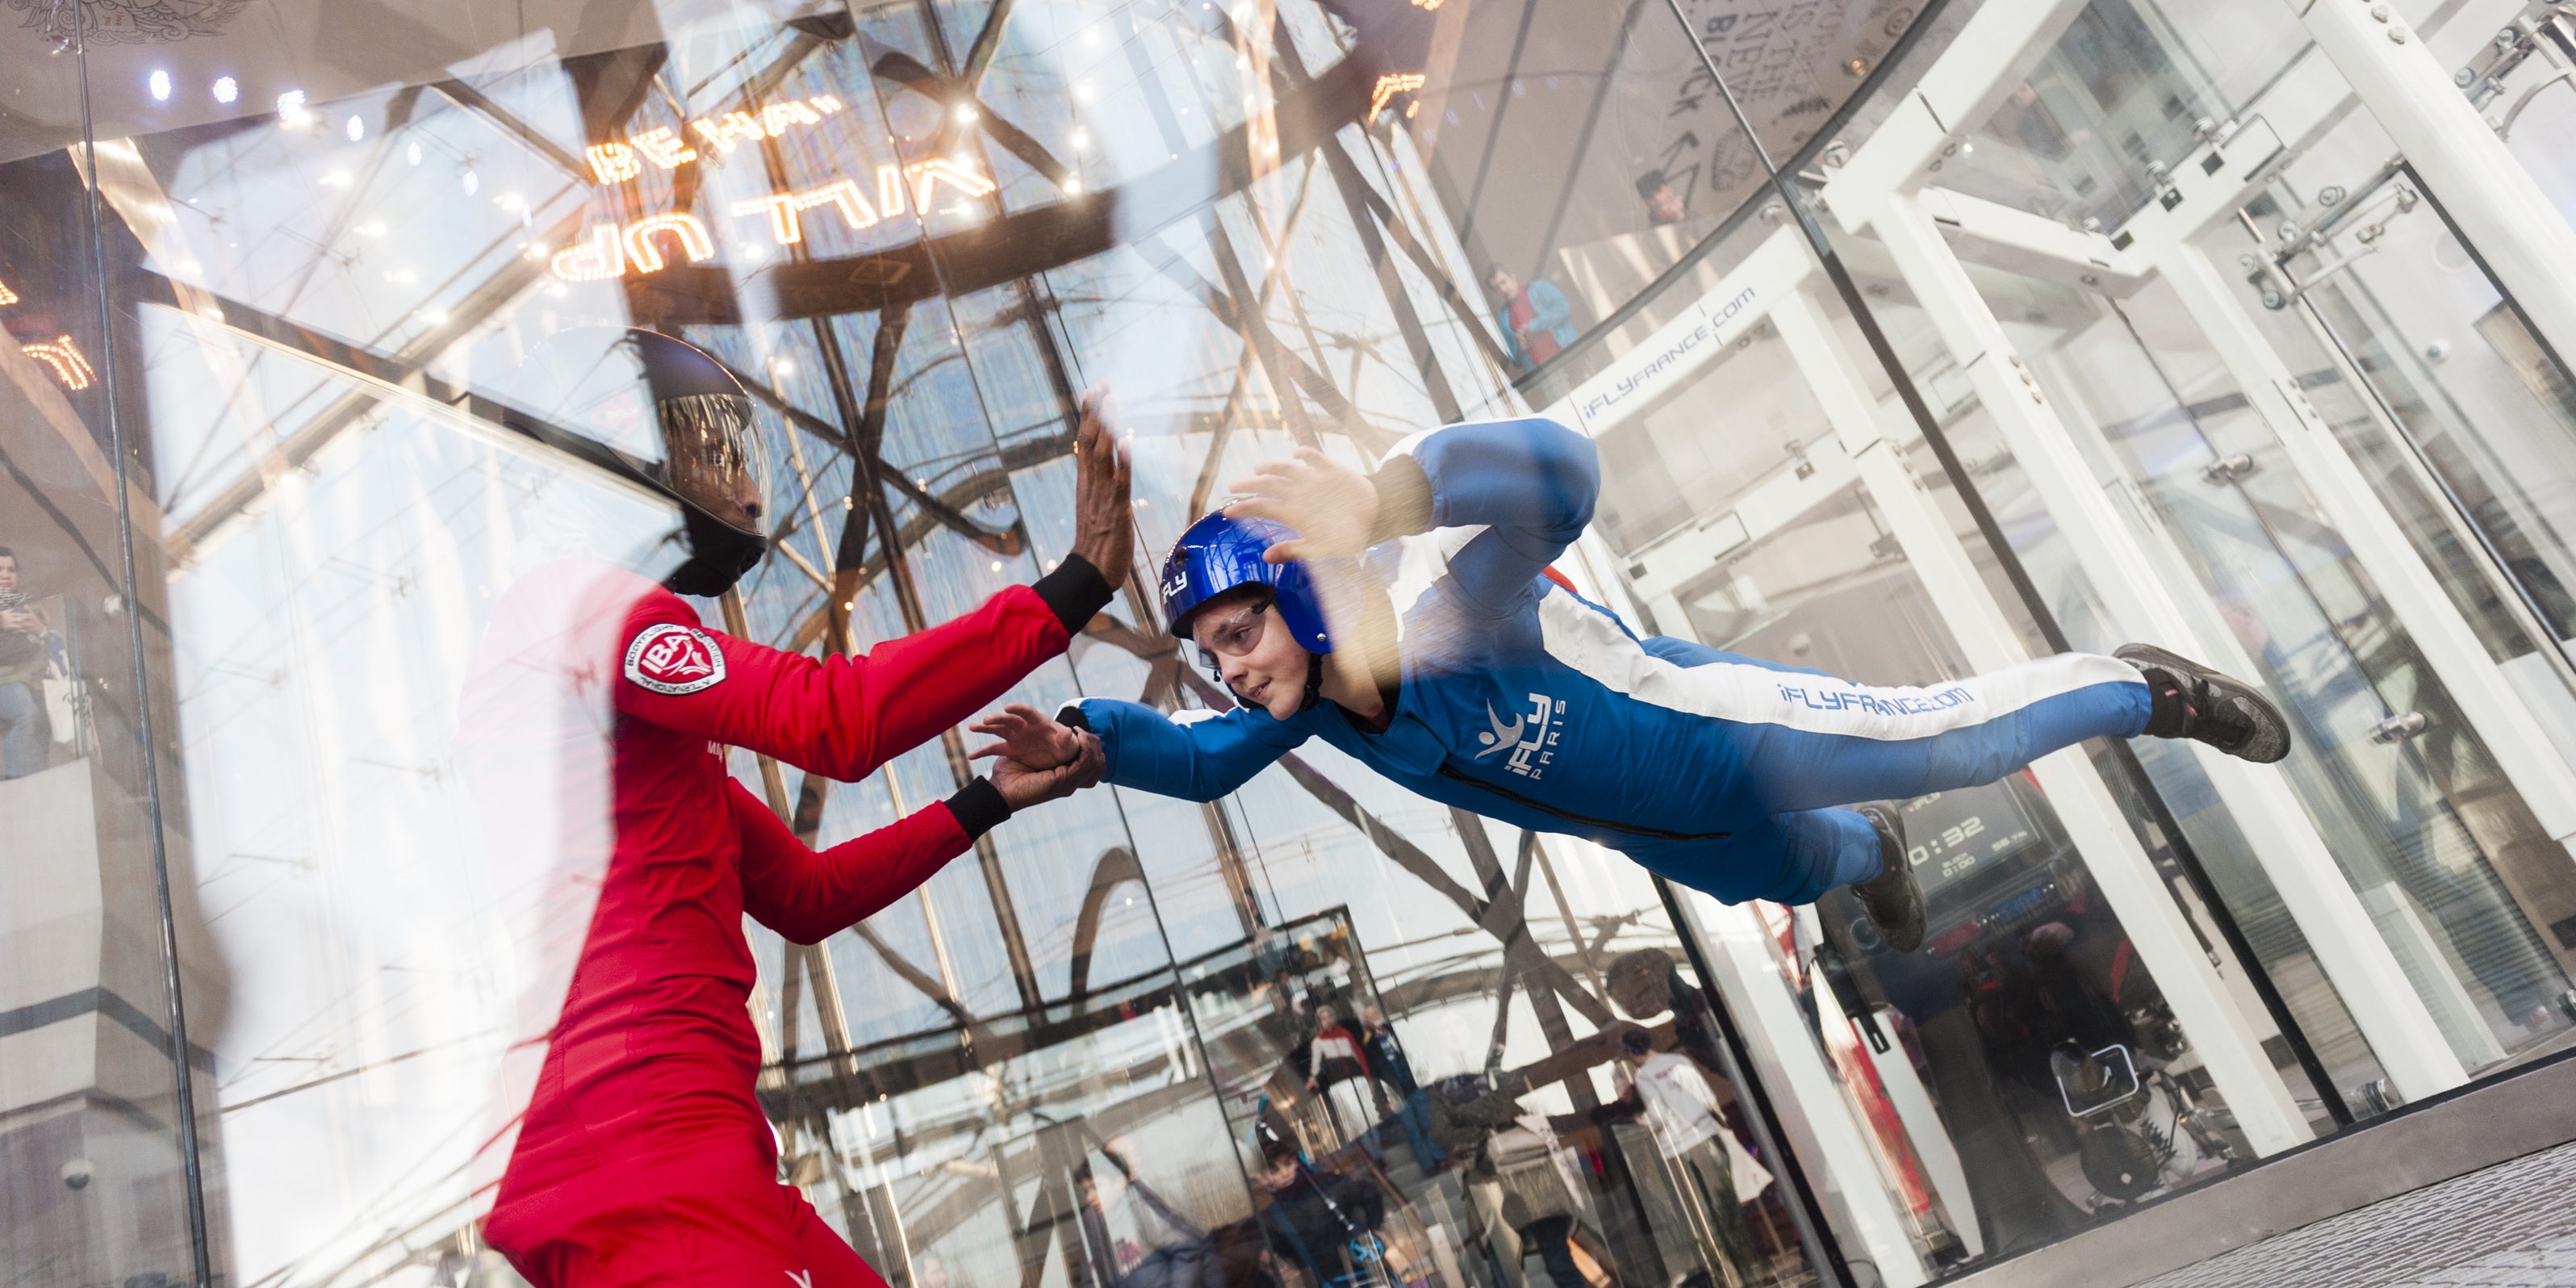 La chute  libre indoor avec Ifly  tester absolument 